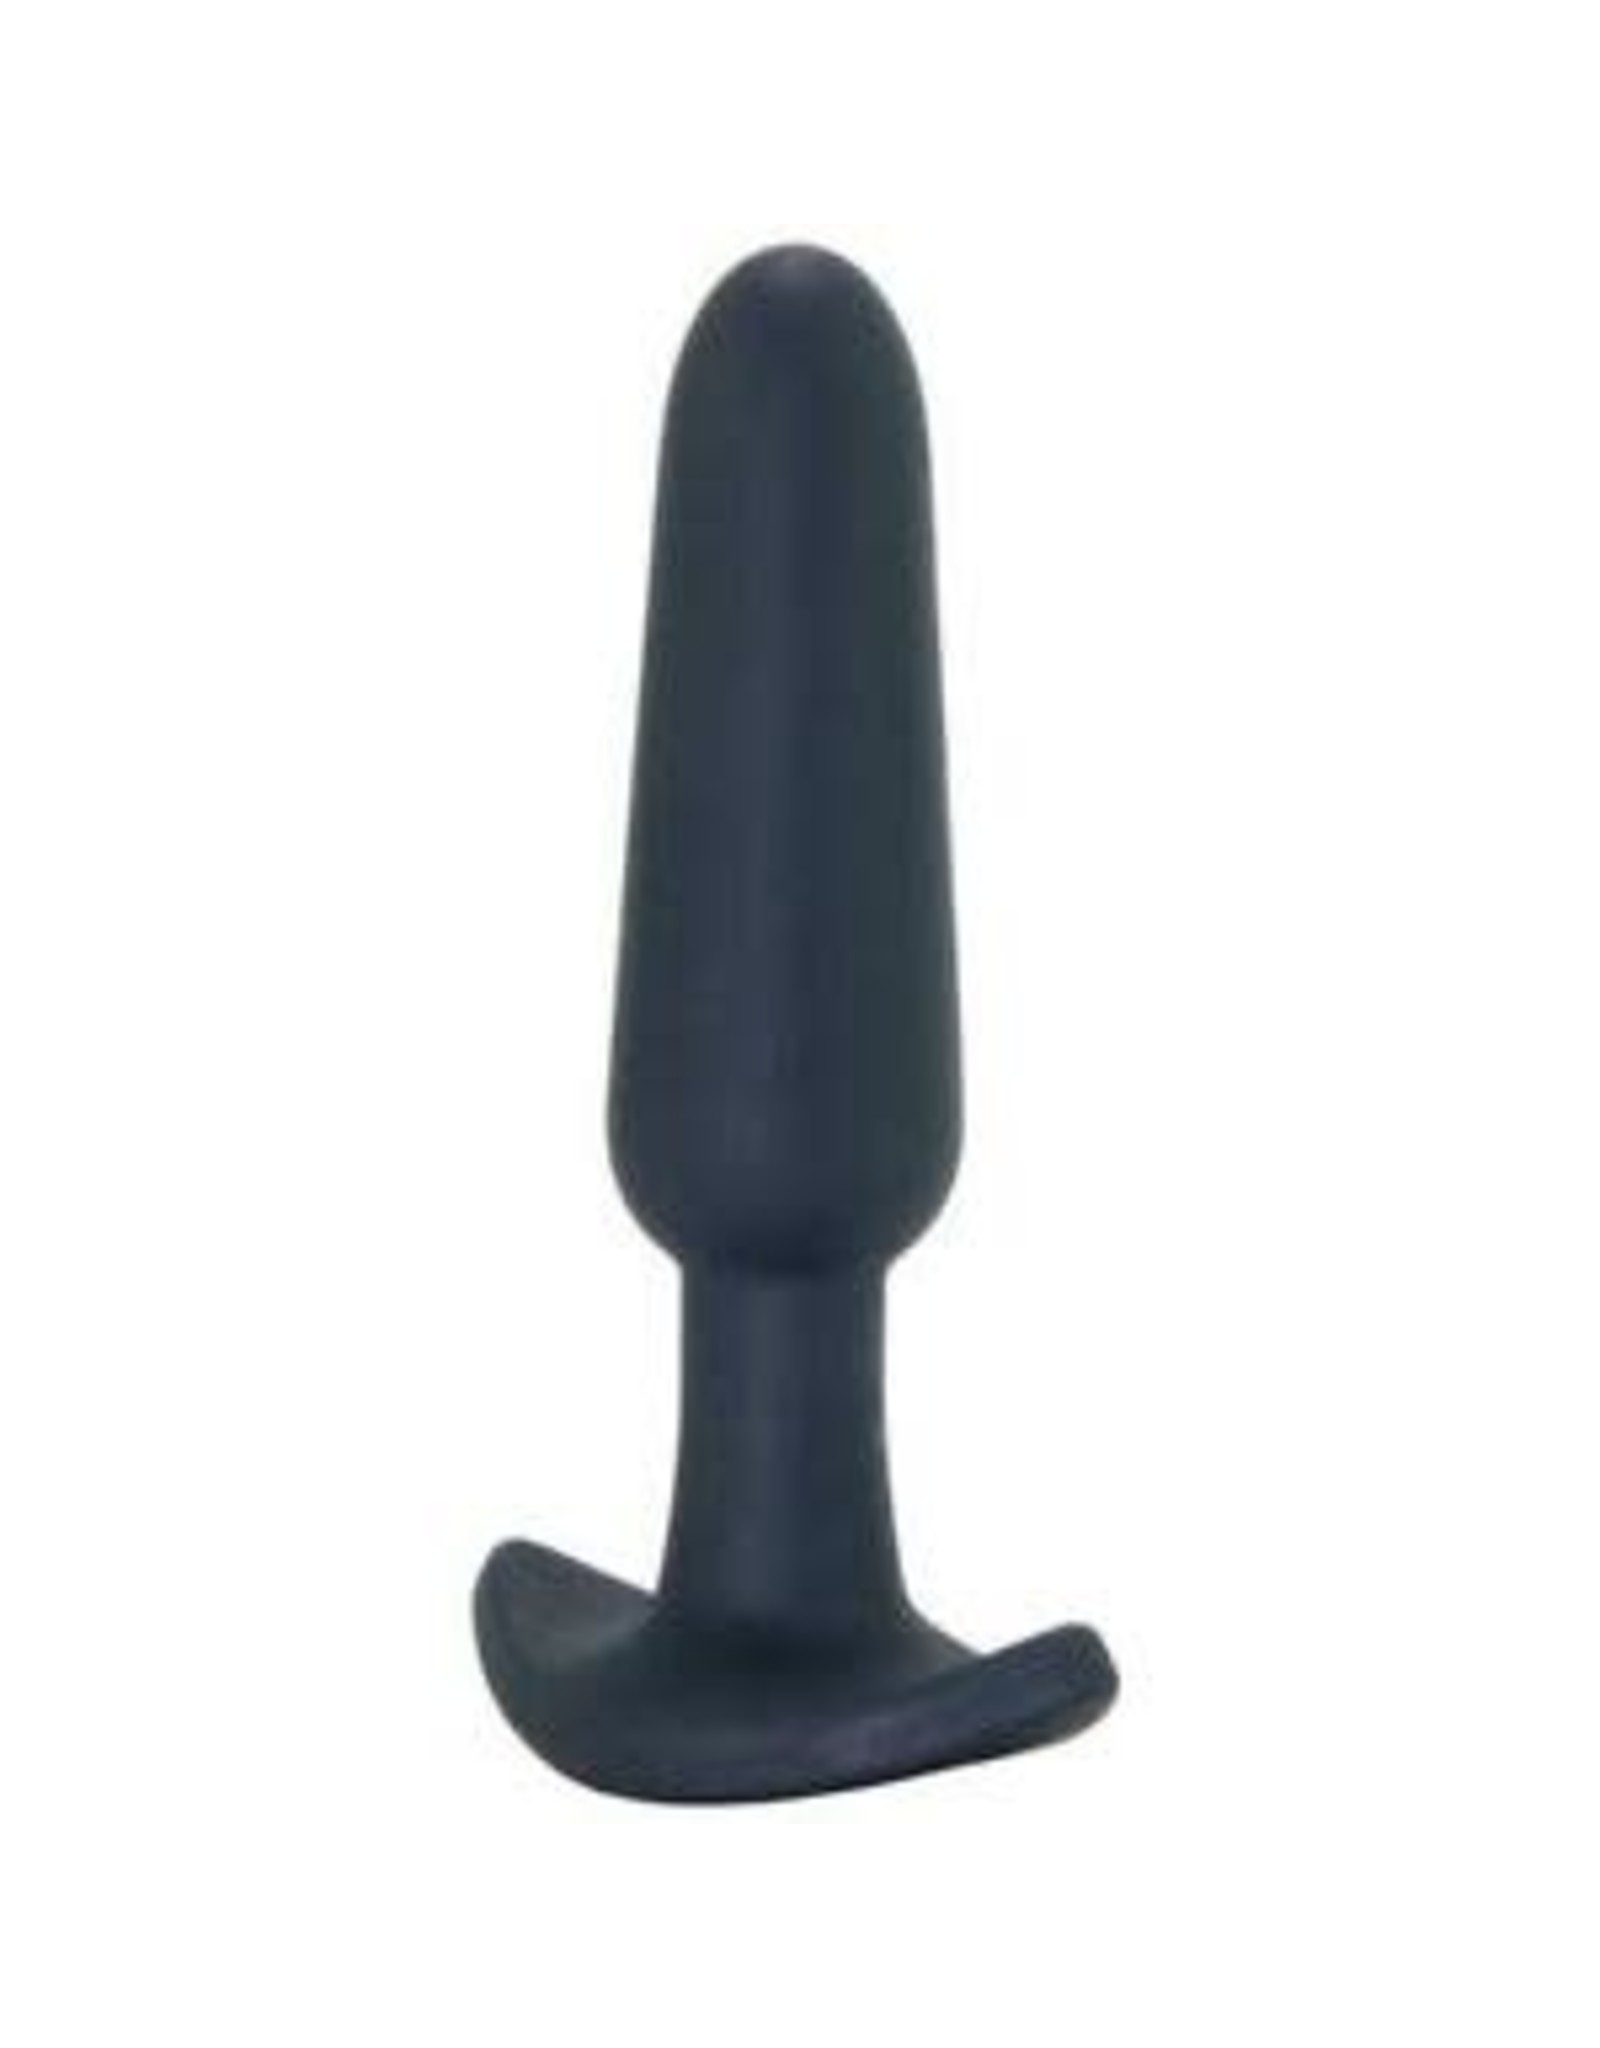 VEDO VEDO - BUMP RECHARGEABLE ANAL VIBE - BLACK